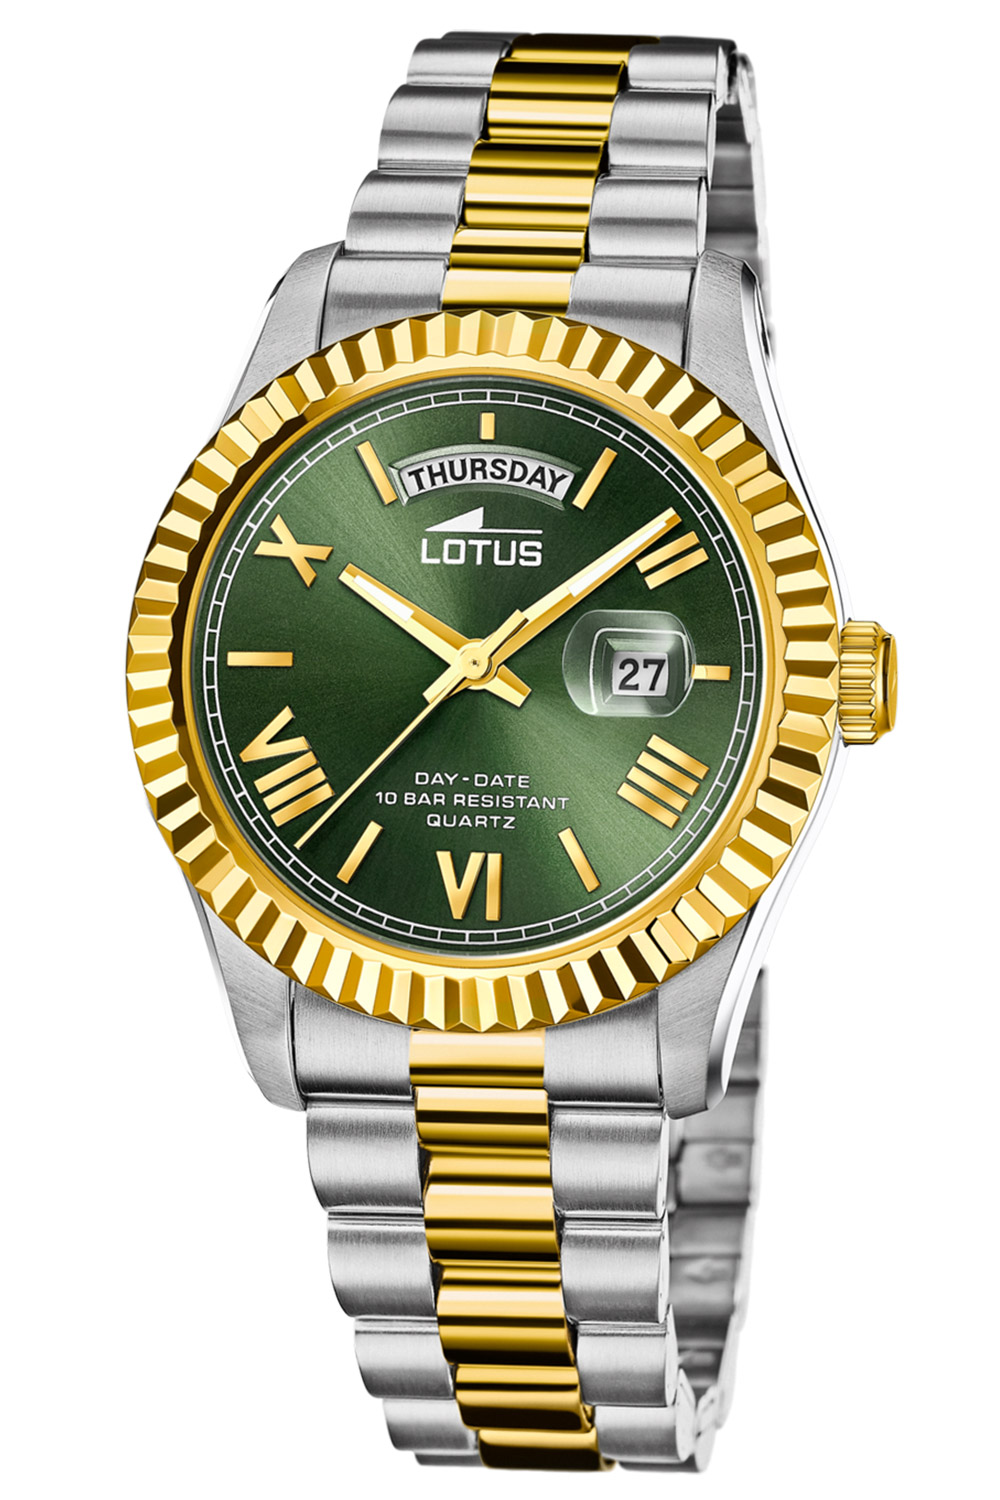 Lotus Men's Watch Freedom Green Day and Date 18855/3 • uhrcenter